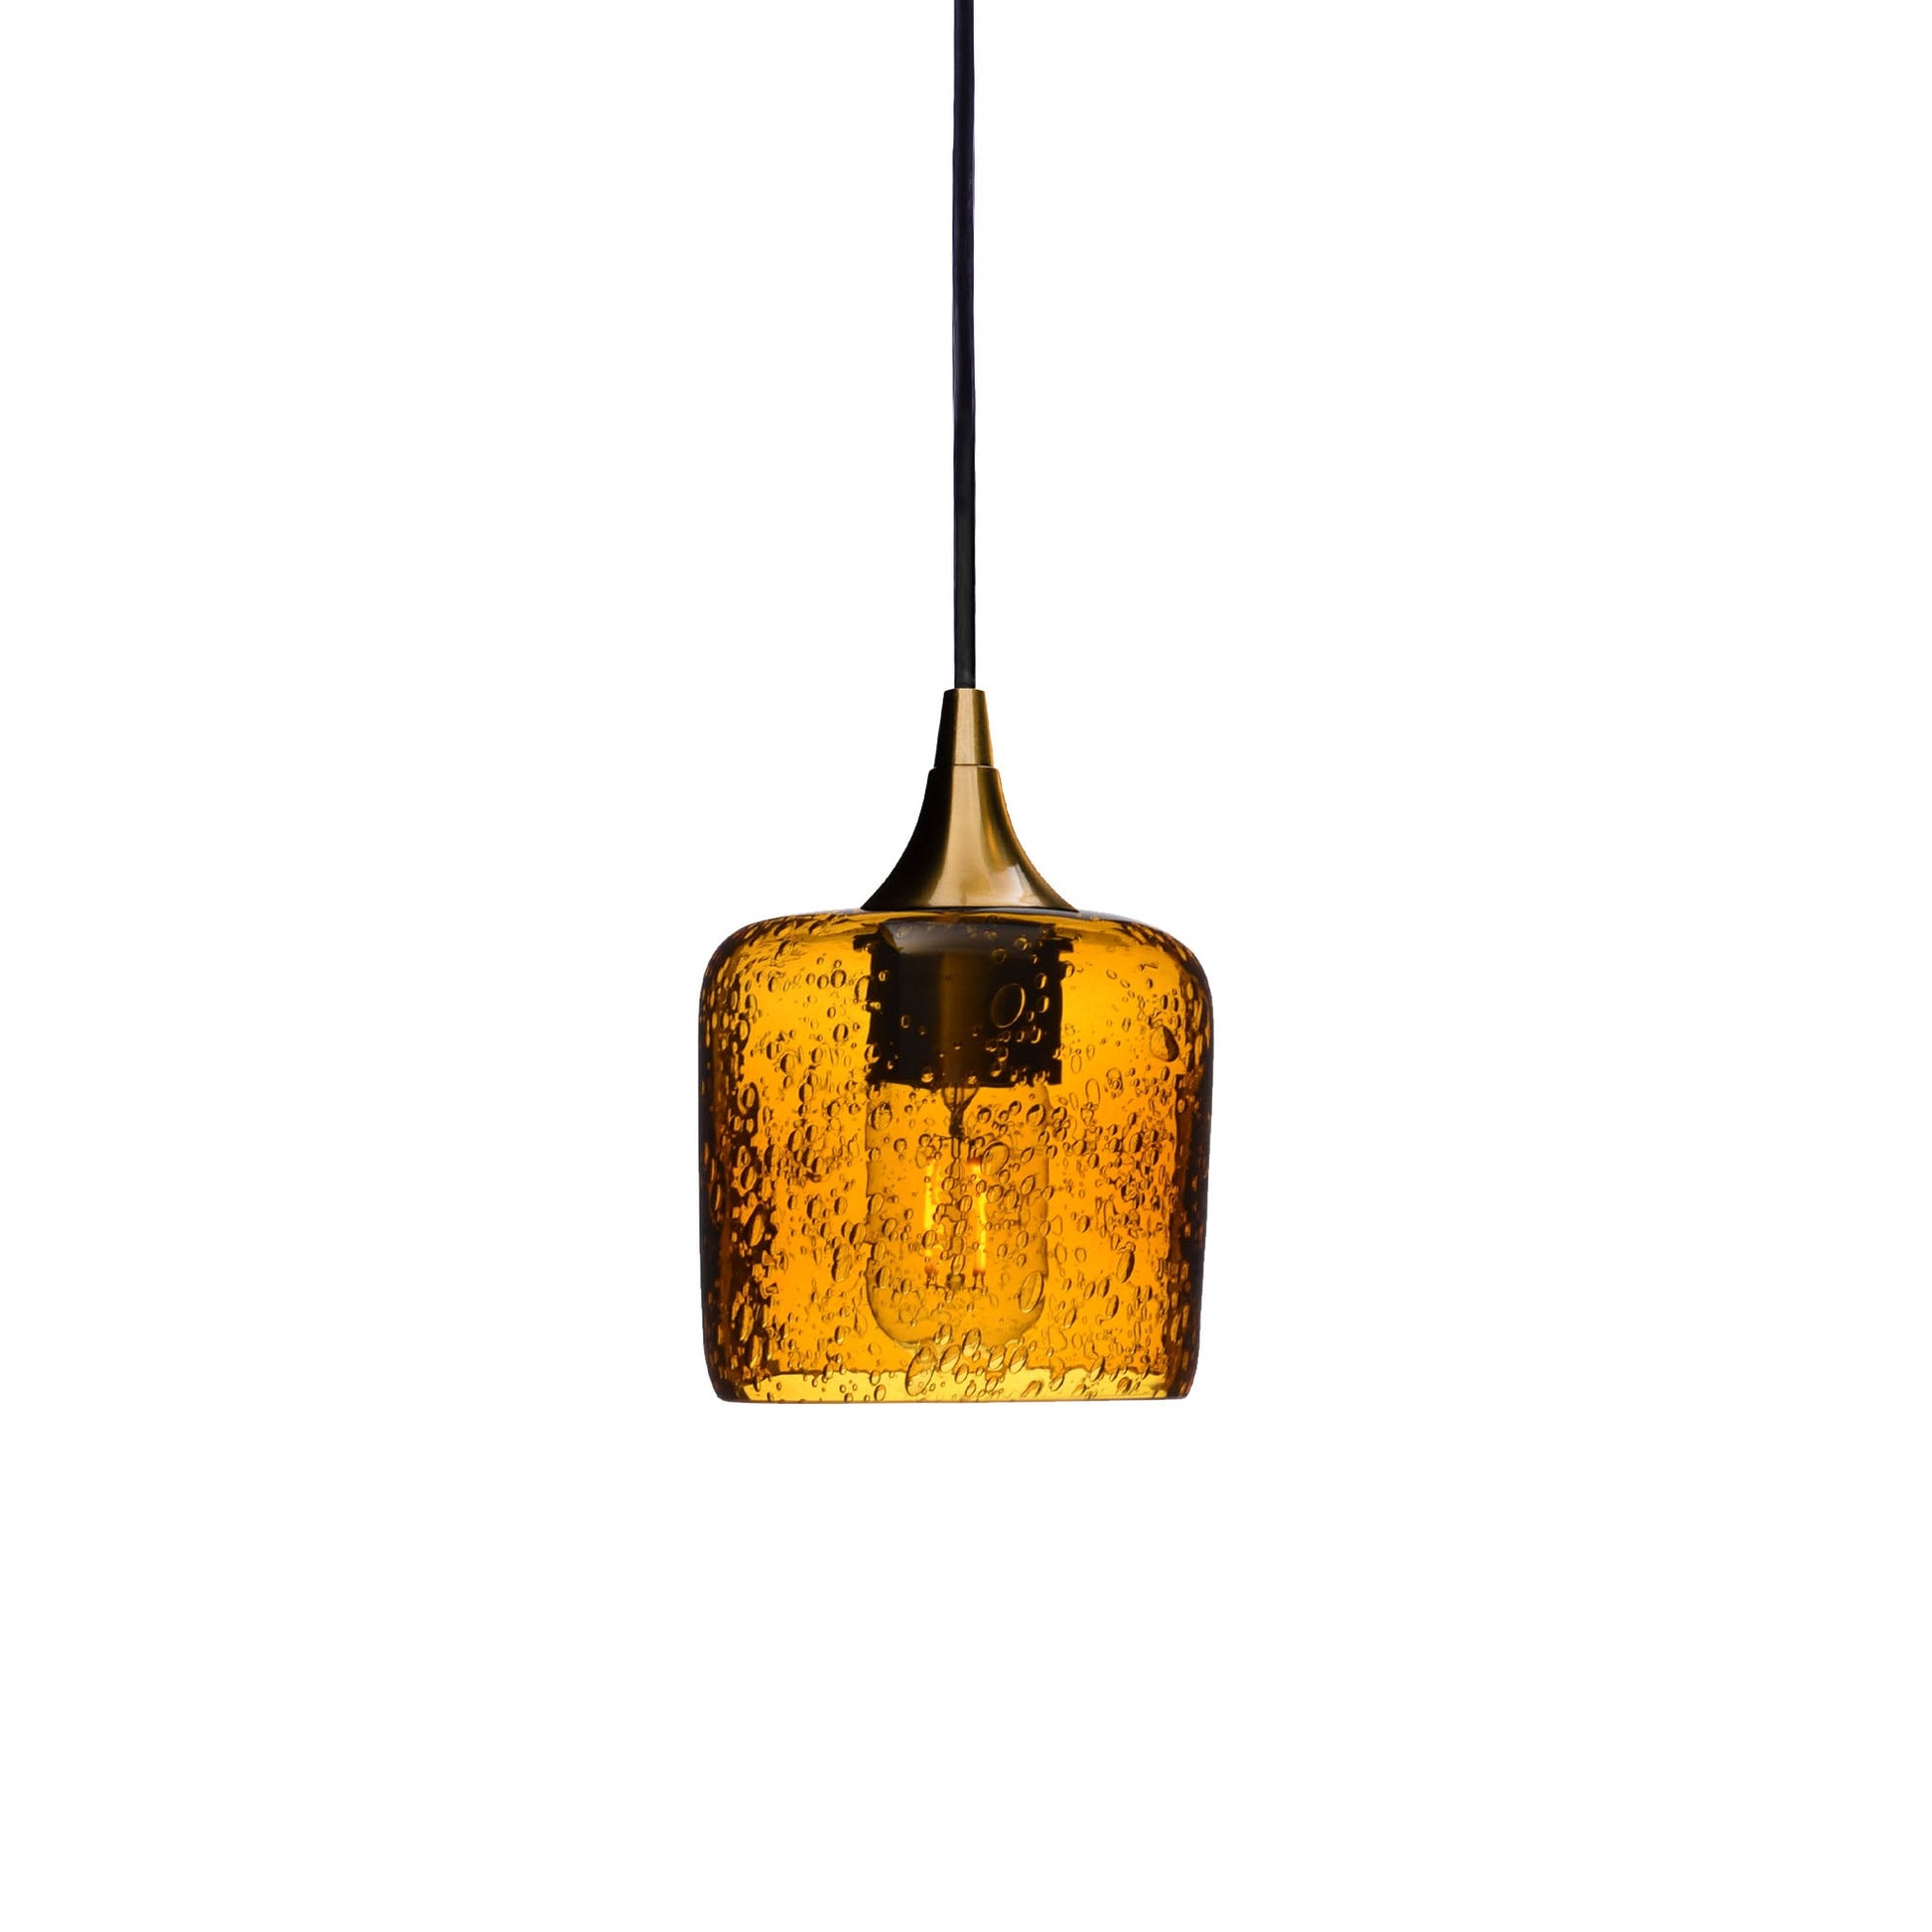 601 Lunar: Single Pendant Light-Glass-Bicycle Glass Co - Hotshop-Harvest Gold-Polished Brass-Bicycle Glass Co